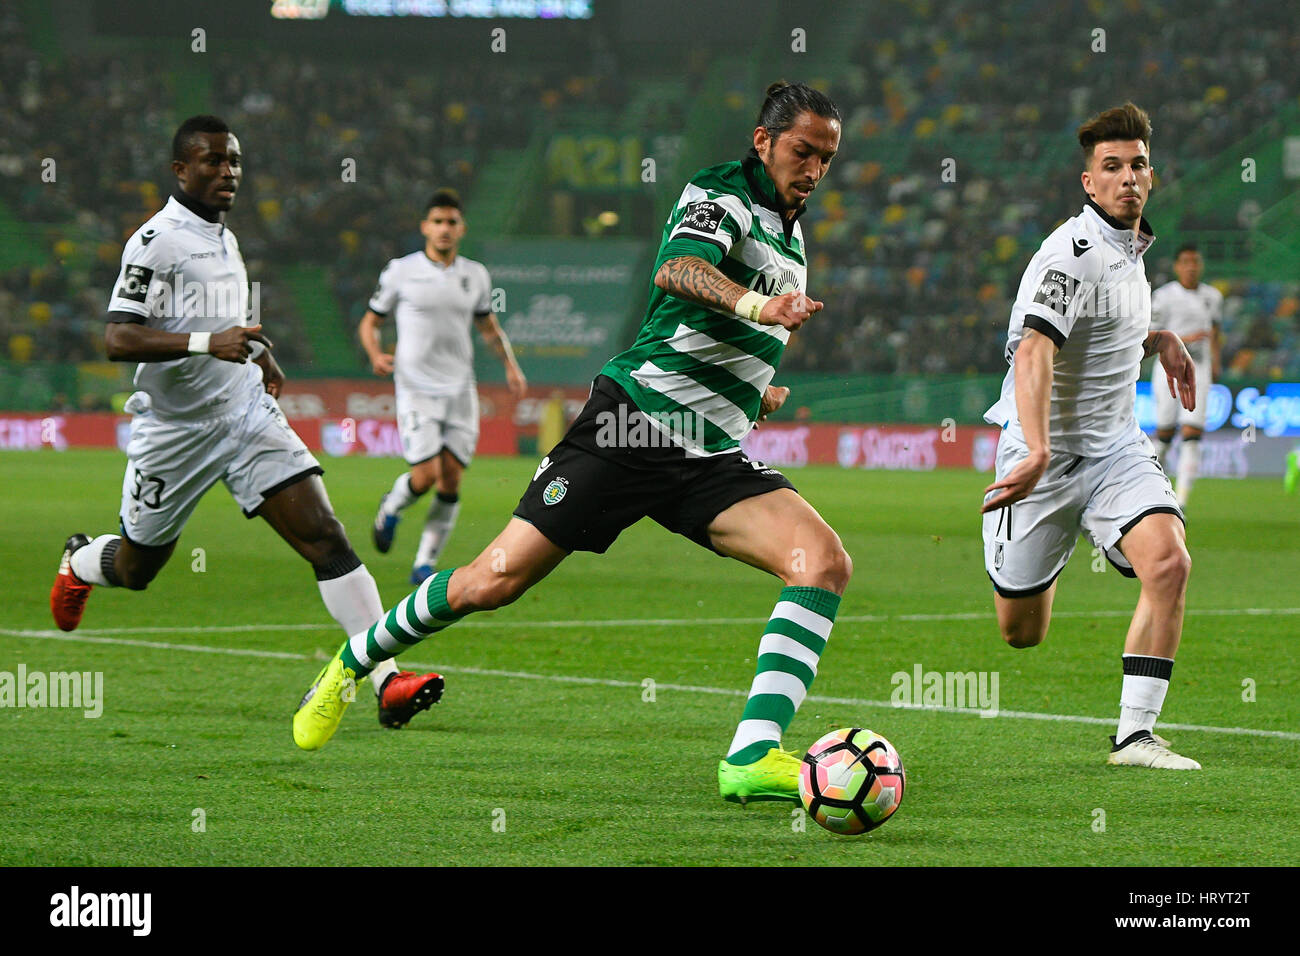 Portugal, Lisbon, Mar. 05, 2017 - FOOTBALL - Schelotto, Sporting defender, in action during match between Sporting Clube de Portugal and Vitória Guimarães for Portuguese Football League match at Estádio Alvalade XXI, in Lisbon, Portugal. Credit: Bruno de Carvalho/Alamy Live News Stock Photo